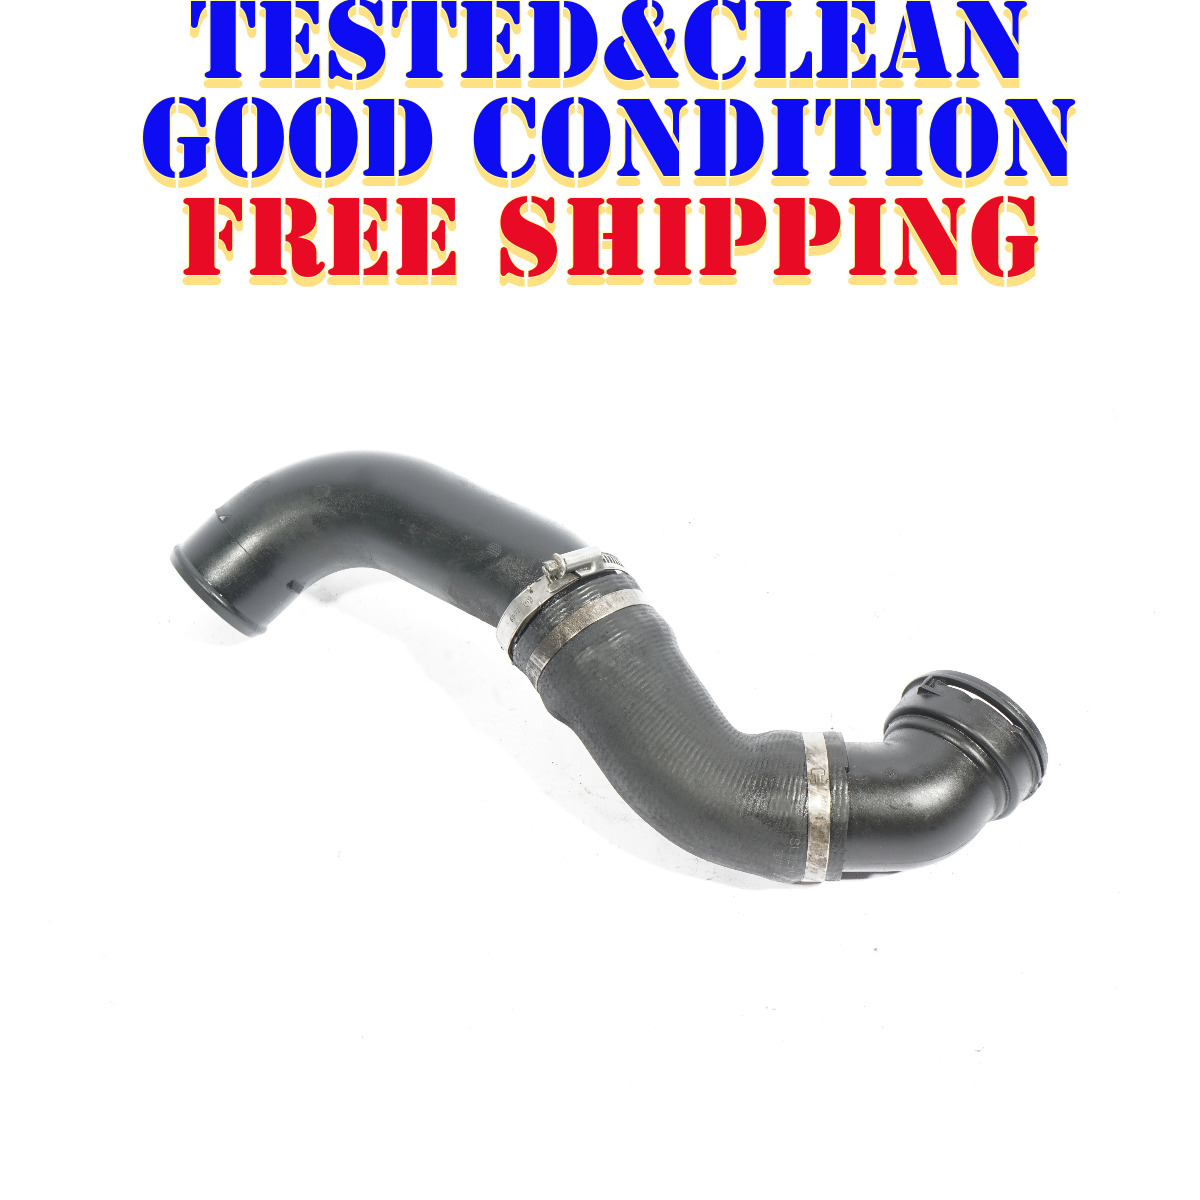 08 09 10 BMW 535xi E60 INTERCOOLER AIR INTAKE DUCT TUBE INDUCTION PIPE OEM